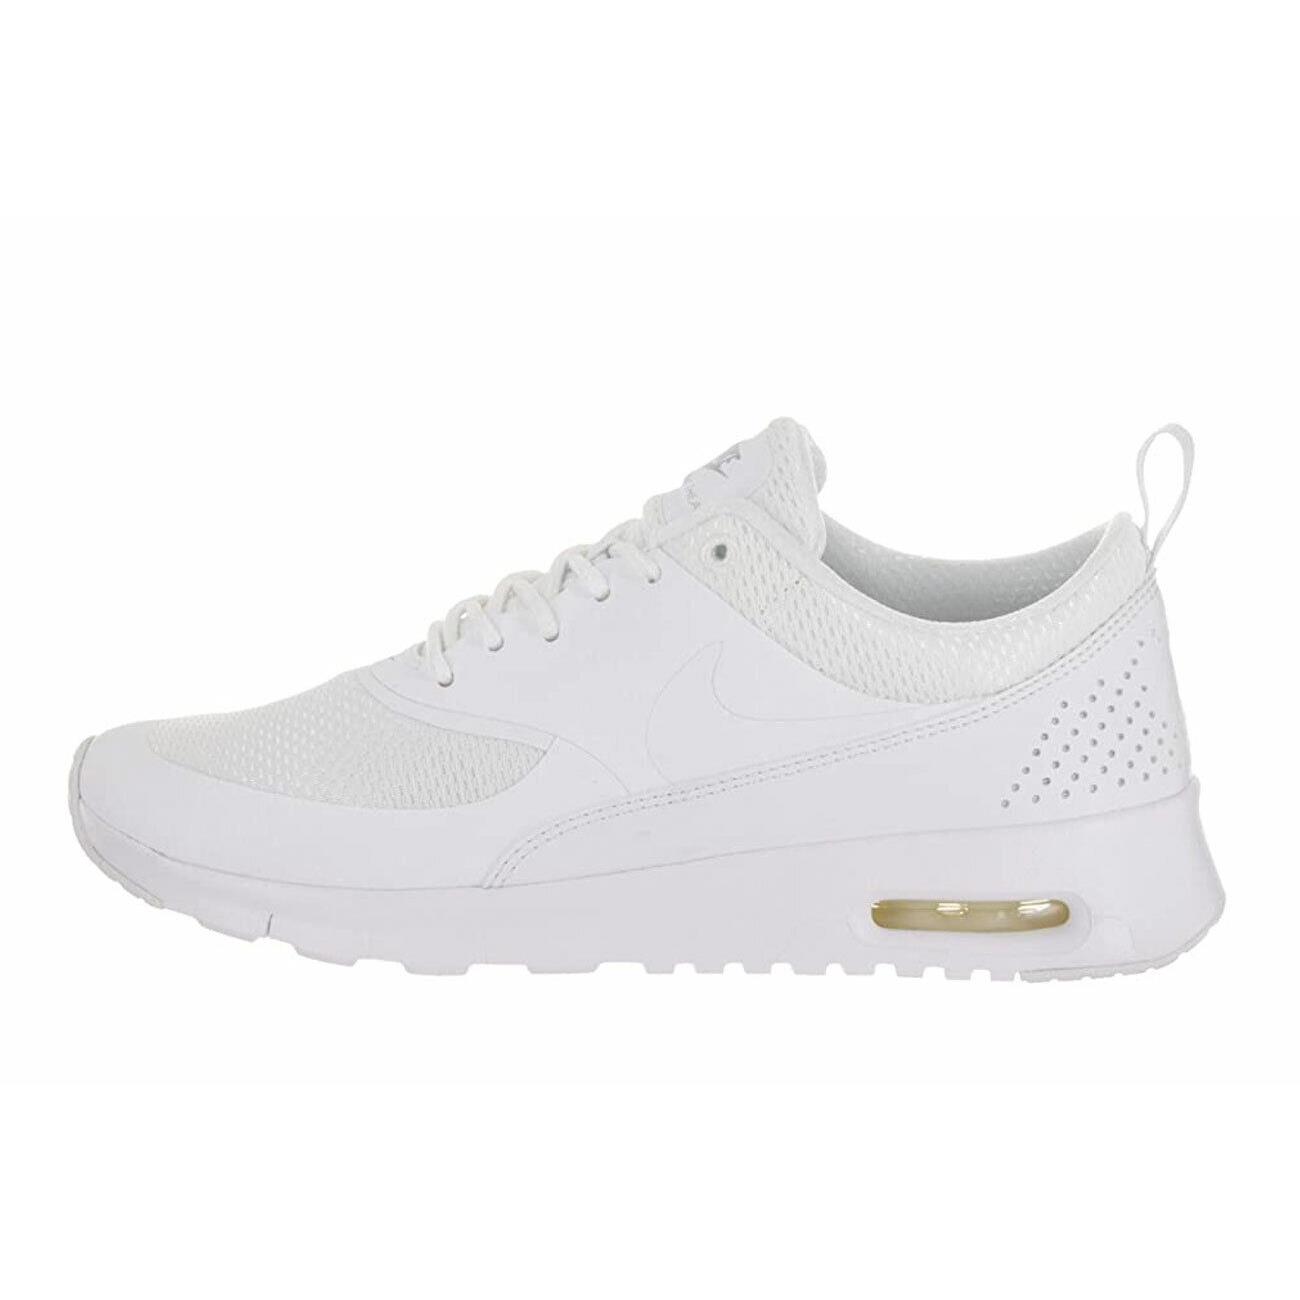 Nike Air Max Thea Low GS 814444 100 Big Kid`s White Running Shoes